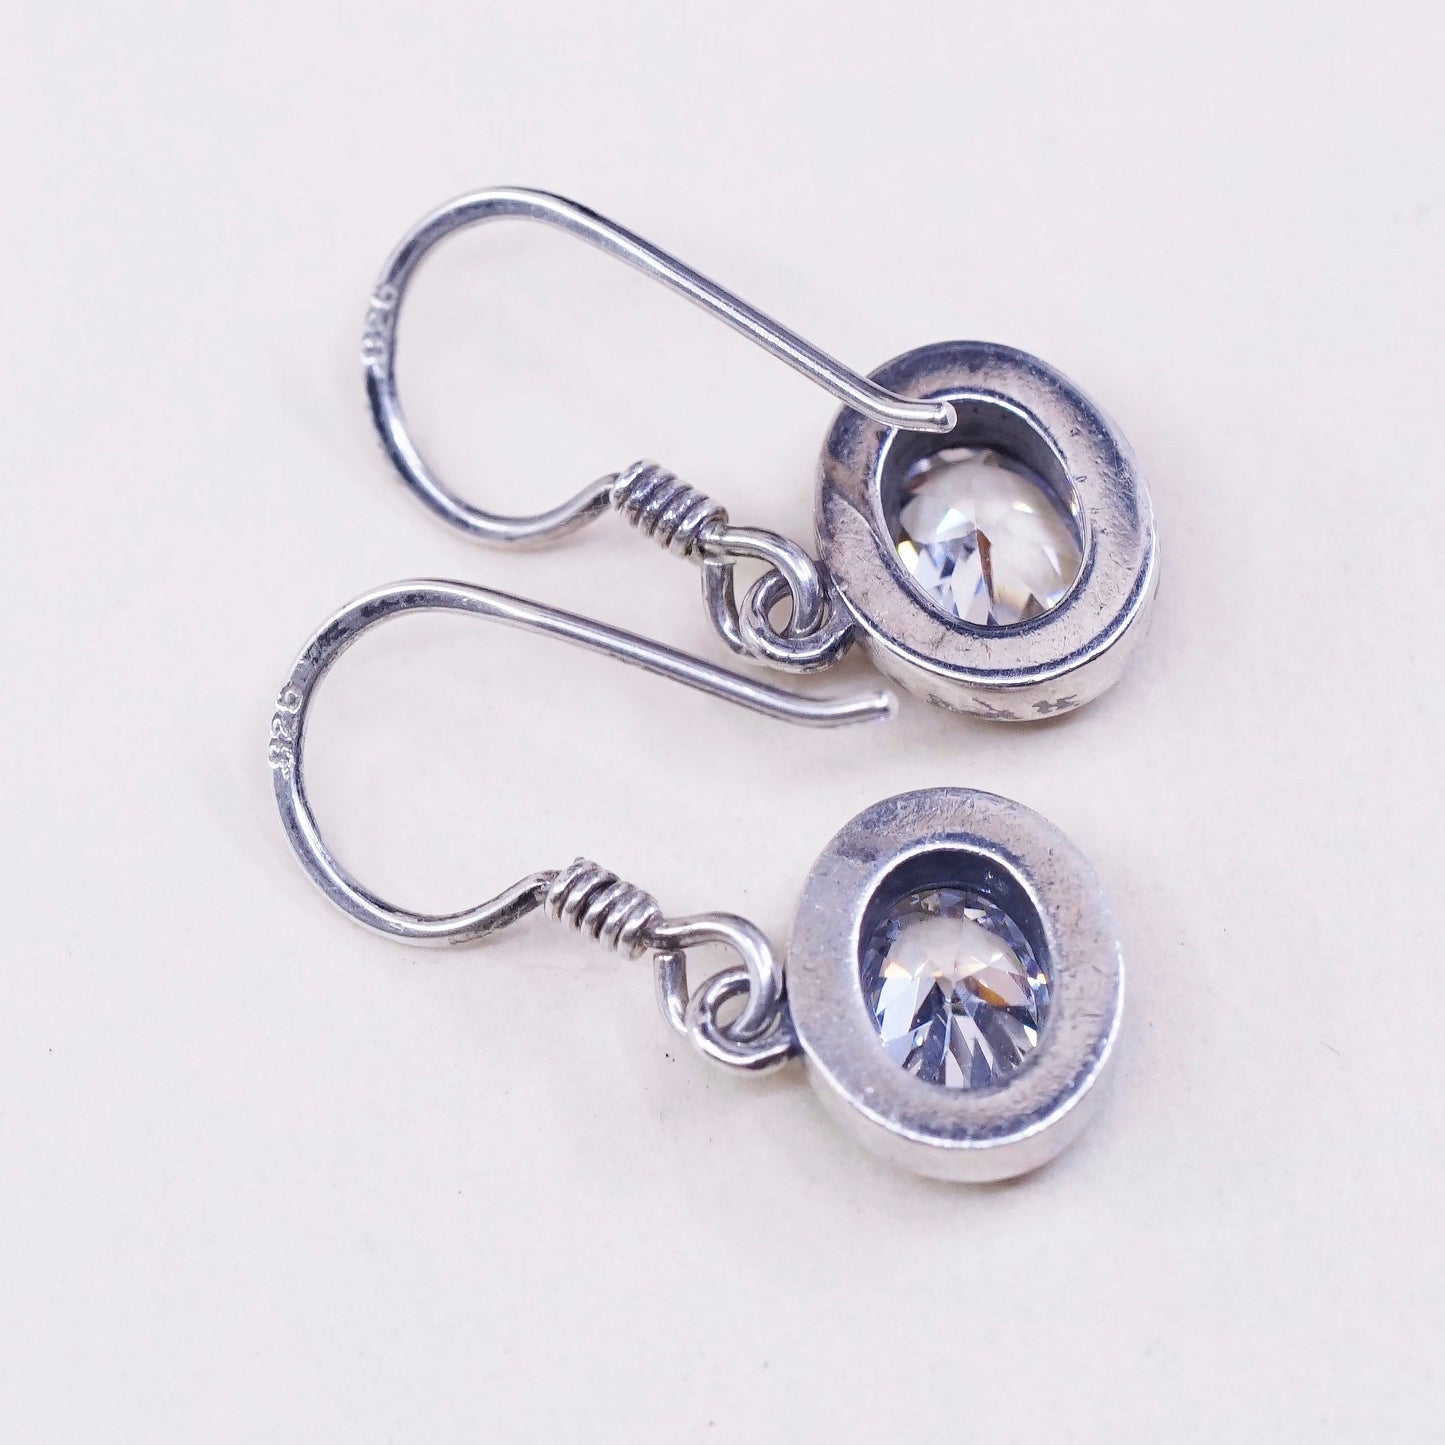 Vintage sterling silver handmade earrings, 925 silver with oval CZ, stamped 925